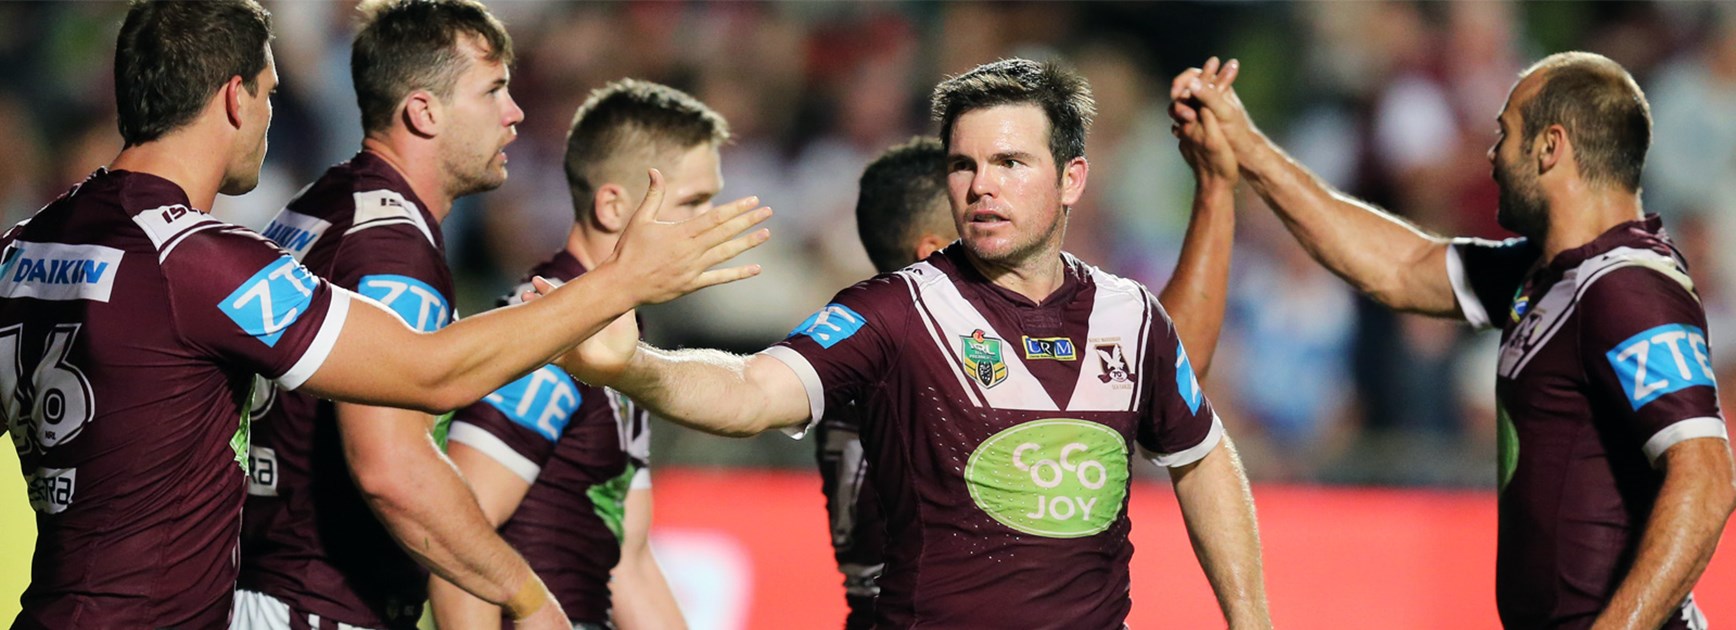 Manly players want to send out retiring captain Jamie Lyon on a high this season.